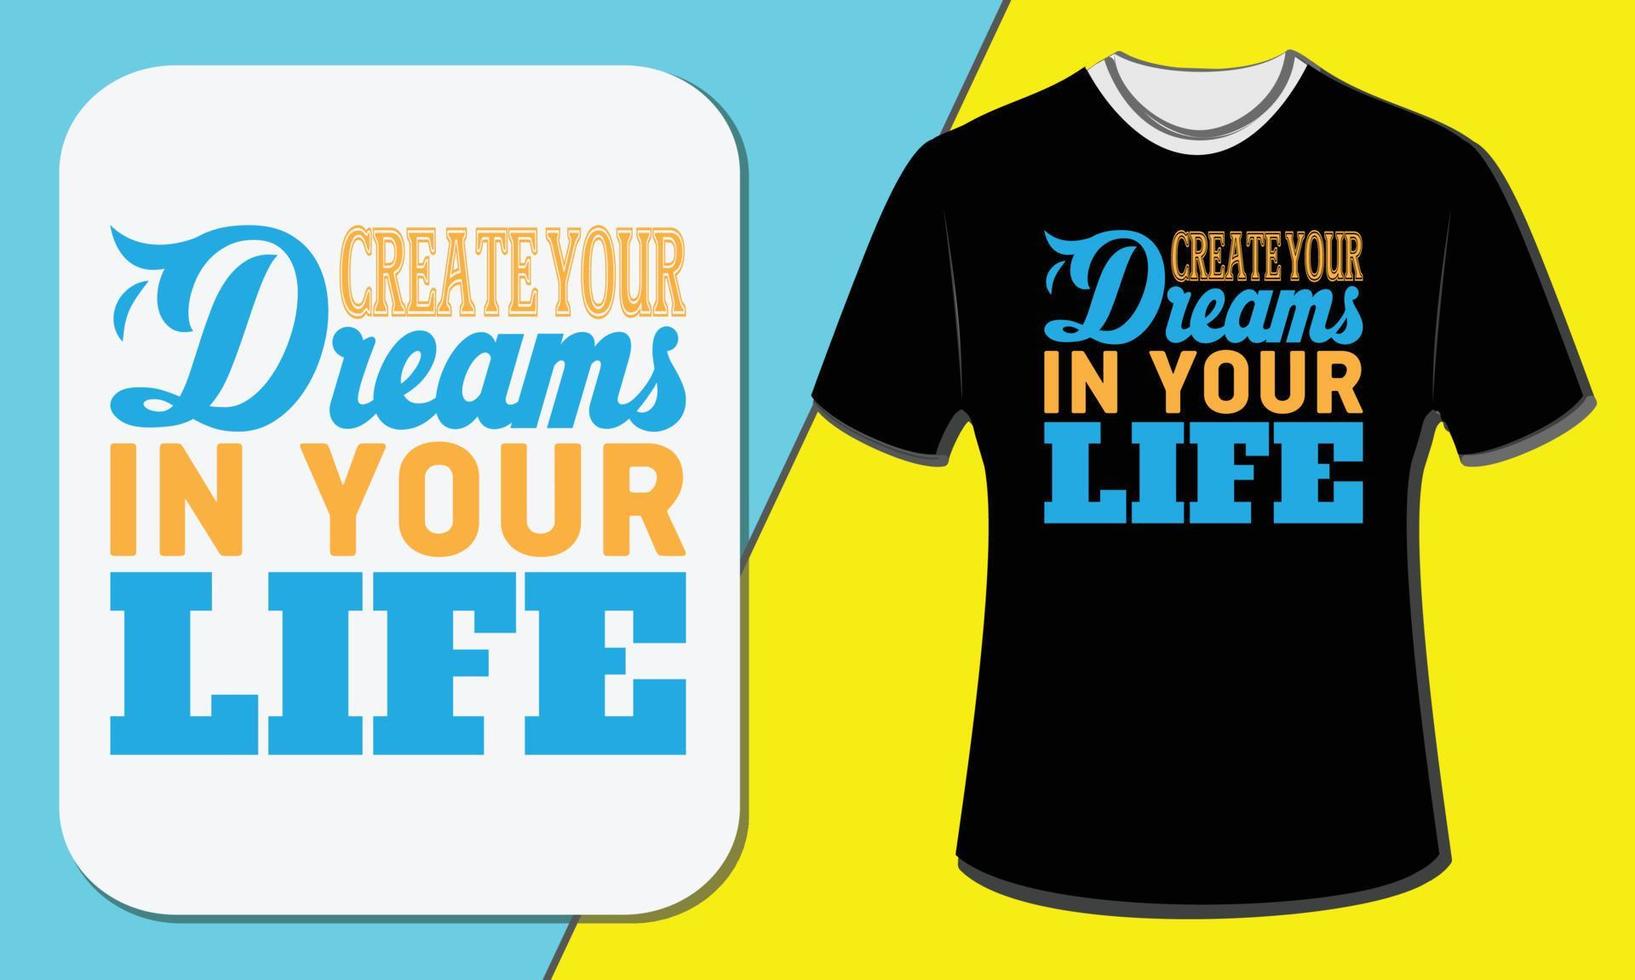 Create your dreams in your life, T shirt design vector